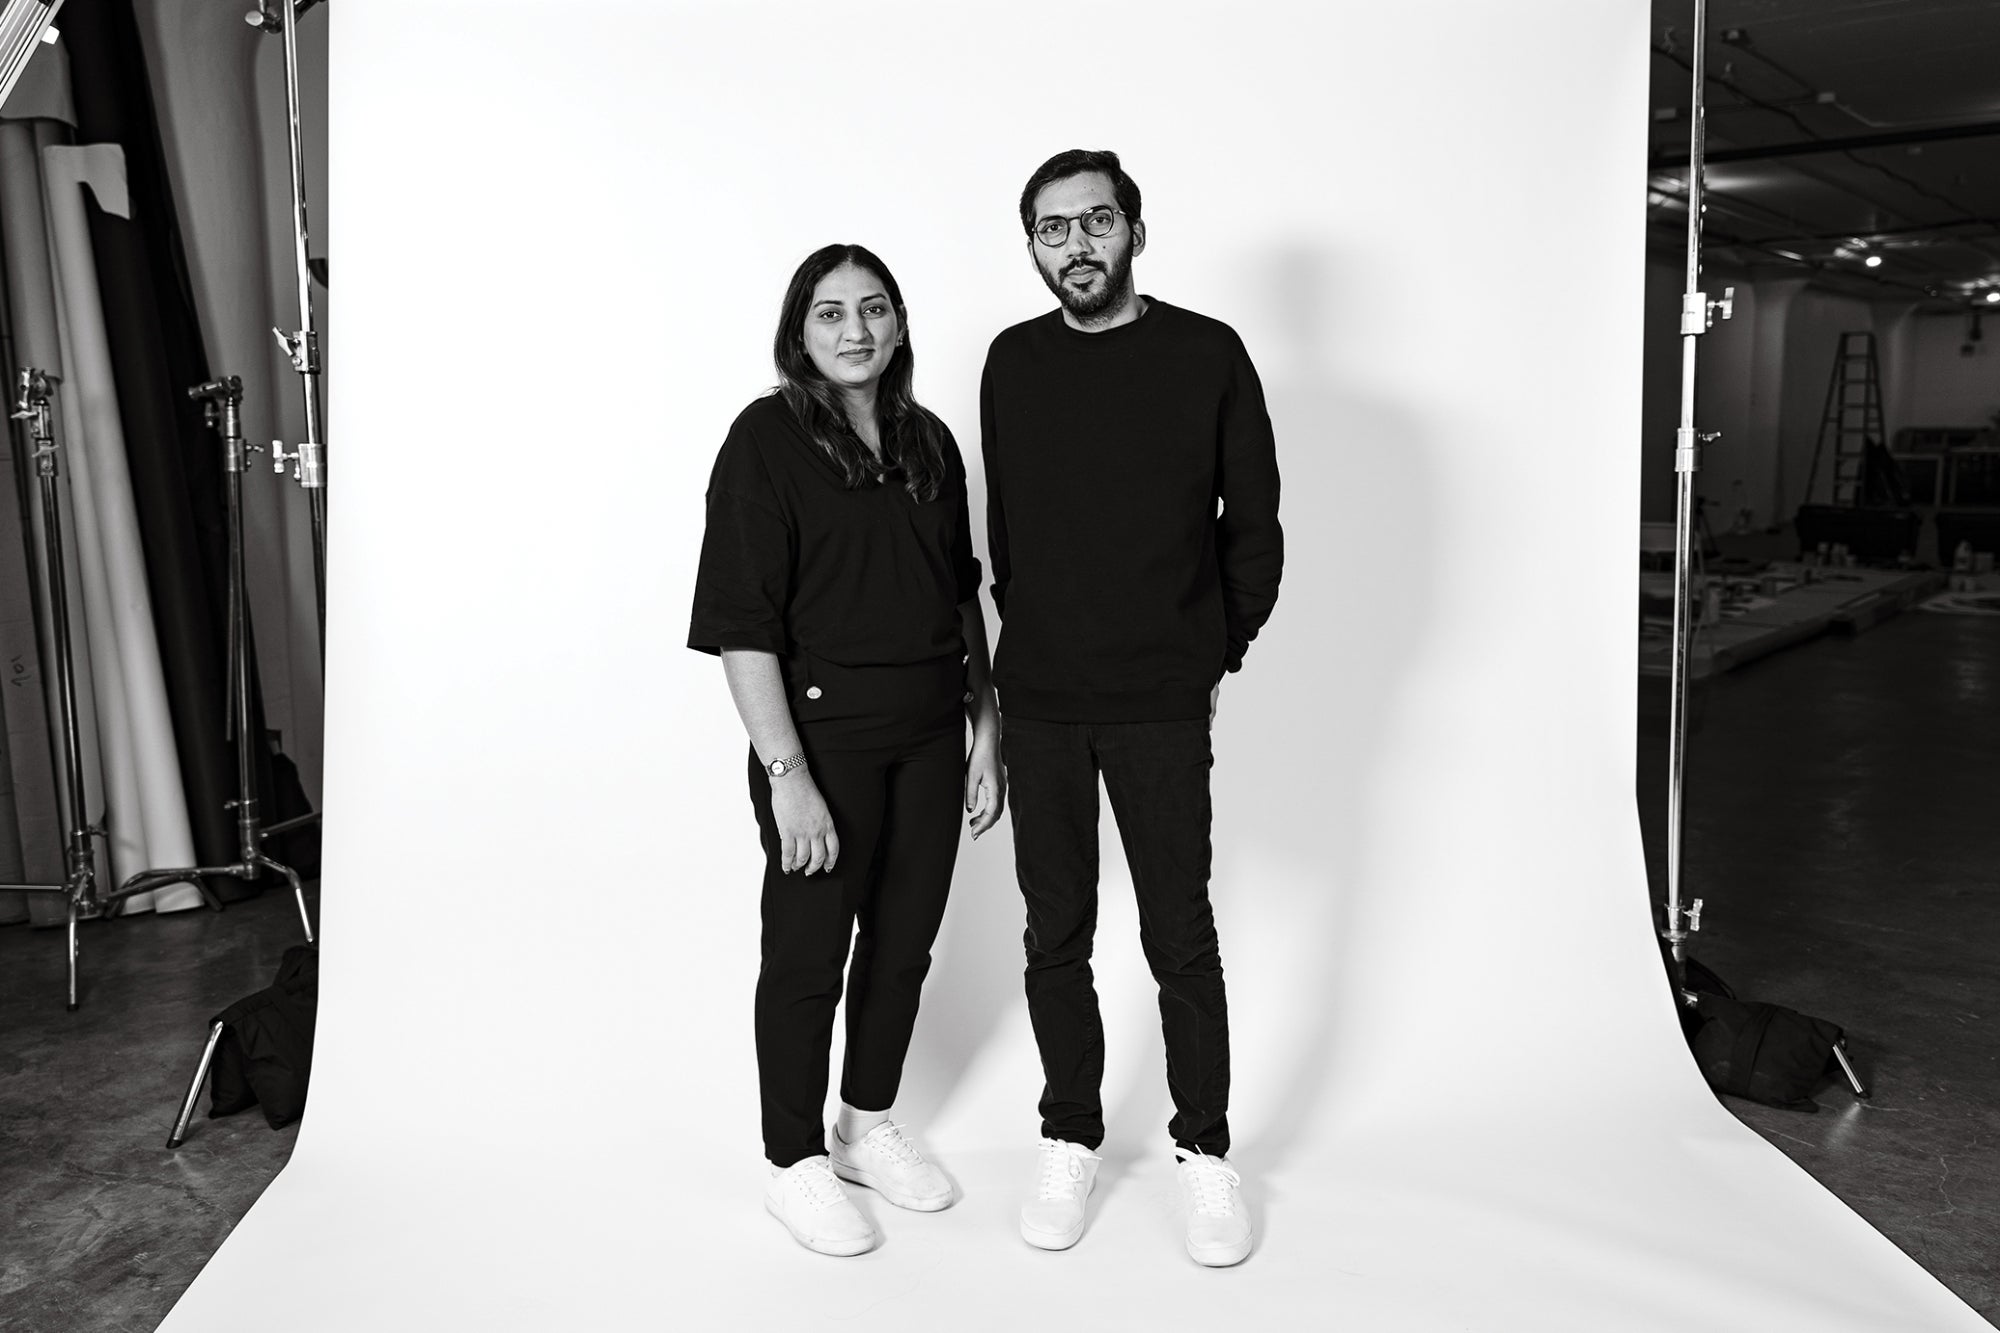 This Couple Escaped Arranged Marriages in Pakistan. Now They Run a Brooklyn Shoe Brand Whose Revenue Went From $1.8M to $12M in Just 2 Years.